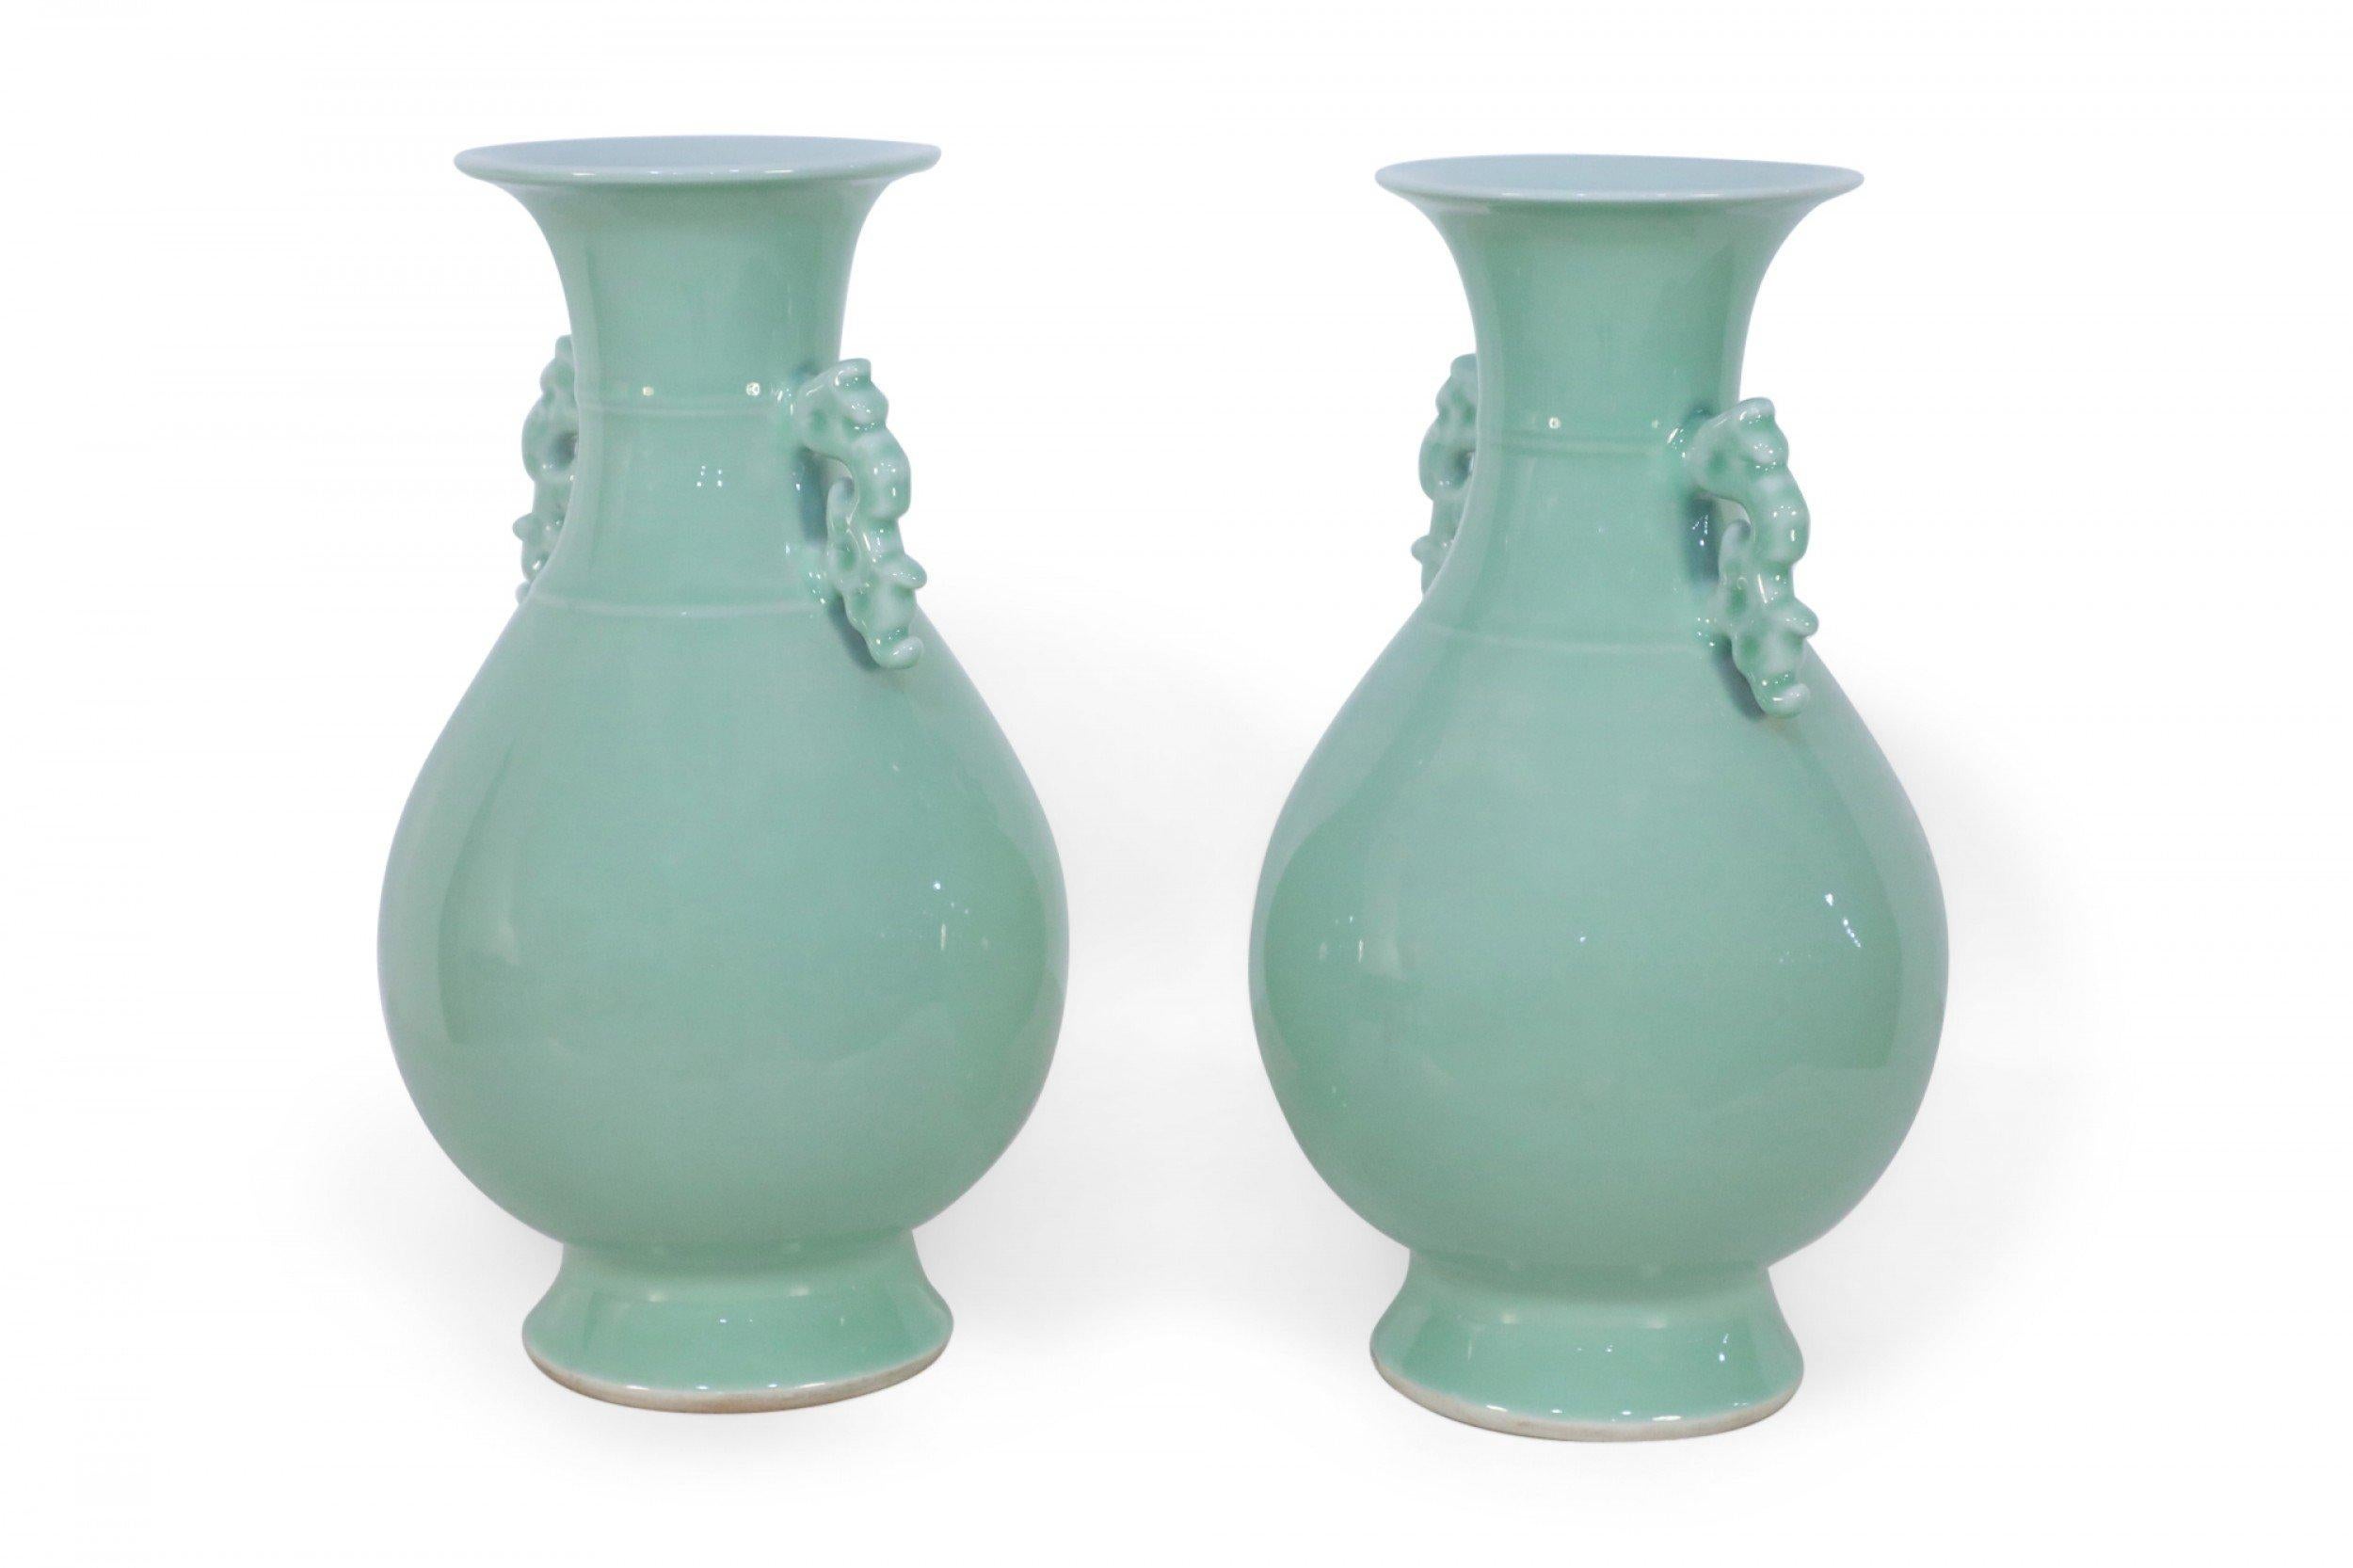 Pair of Chinese celadon colored vases with baluster shapes, accented at the necks with scrolled ears, each sitting atop a round foot (priced as pair).
   